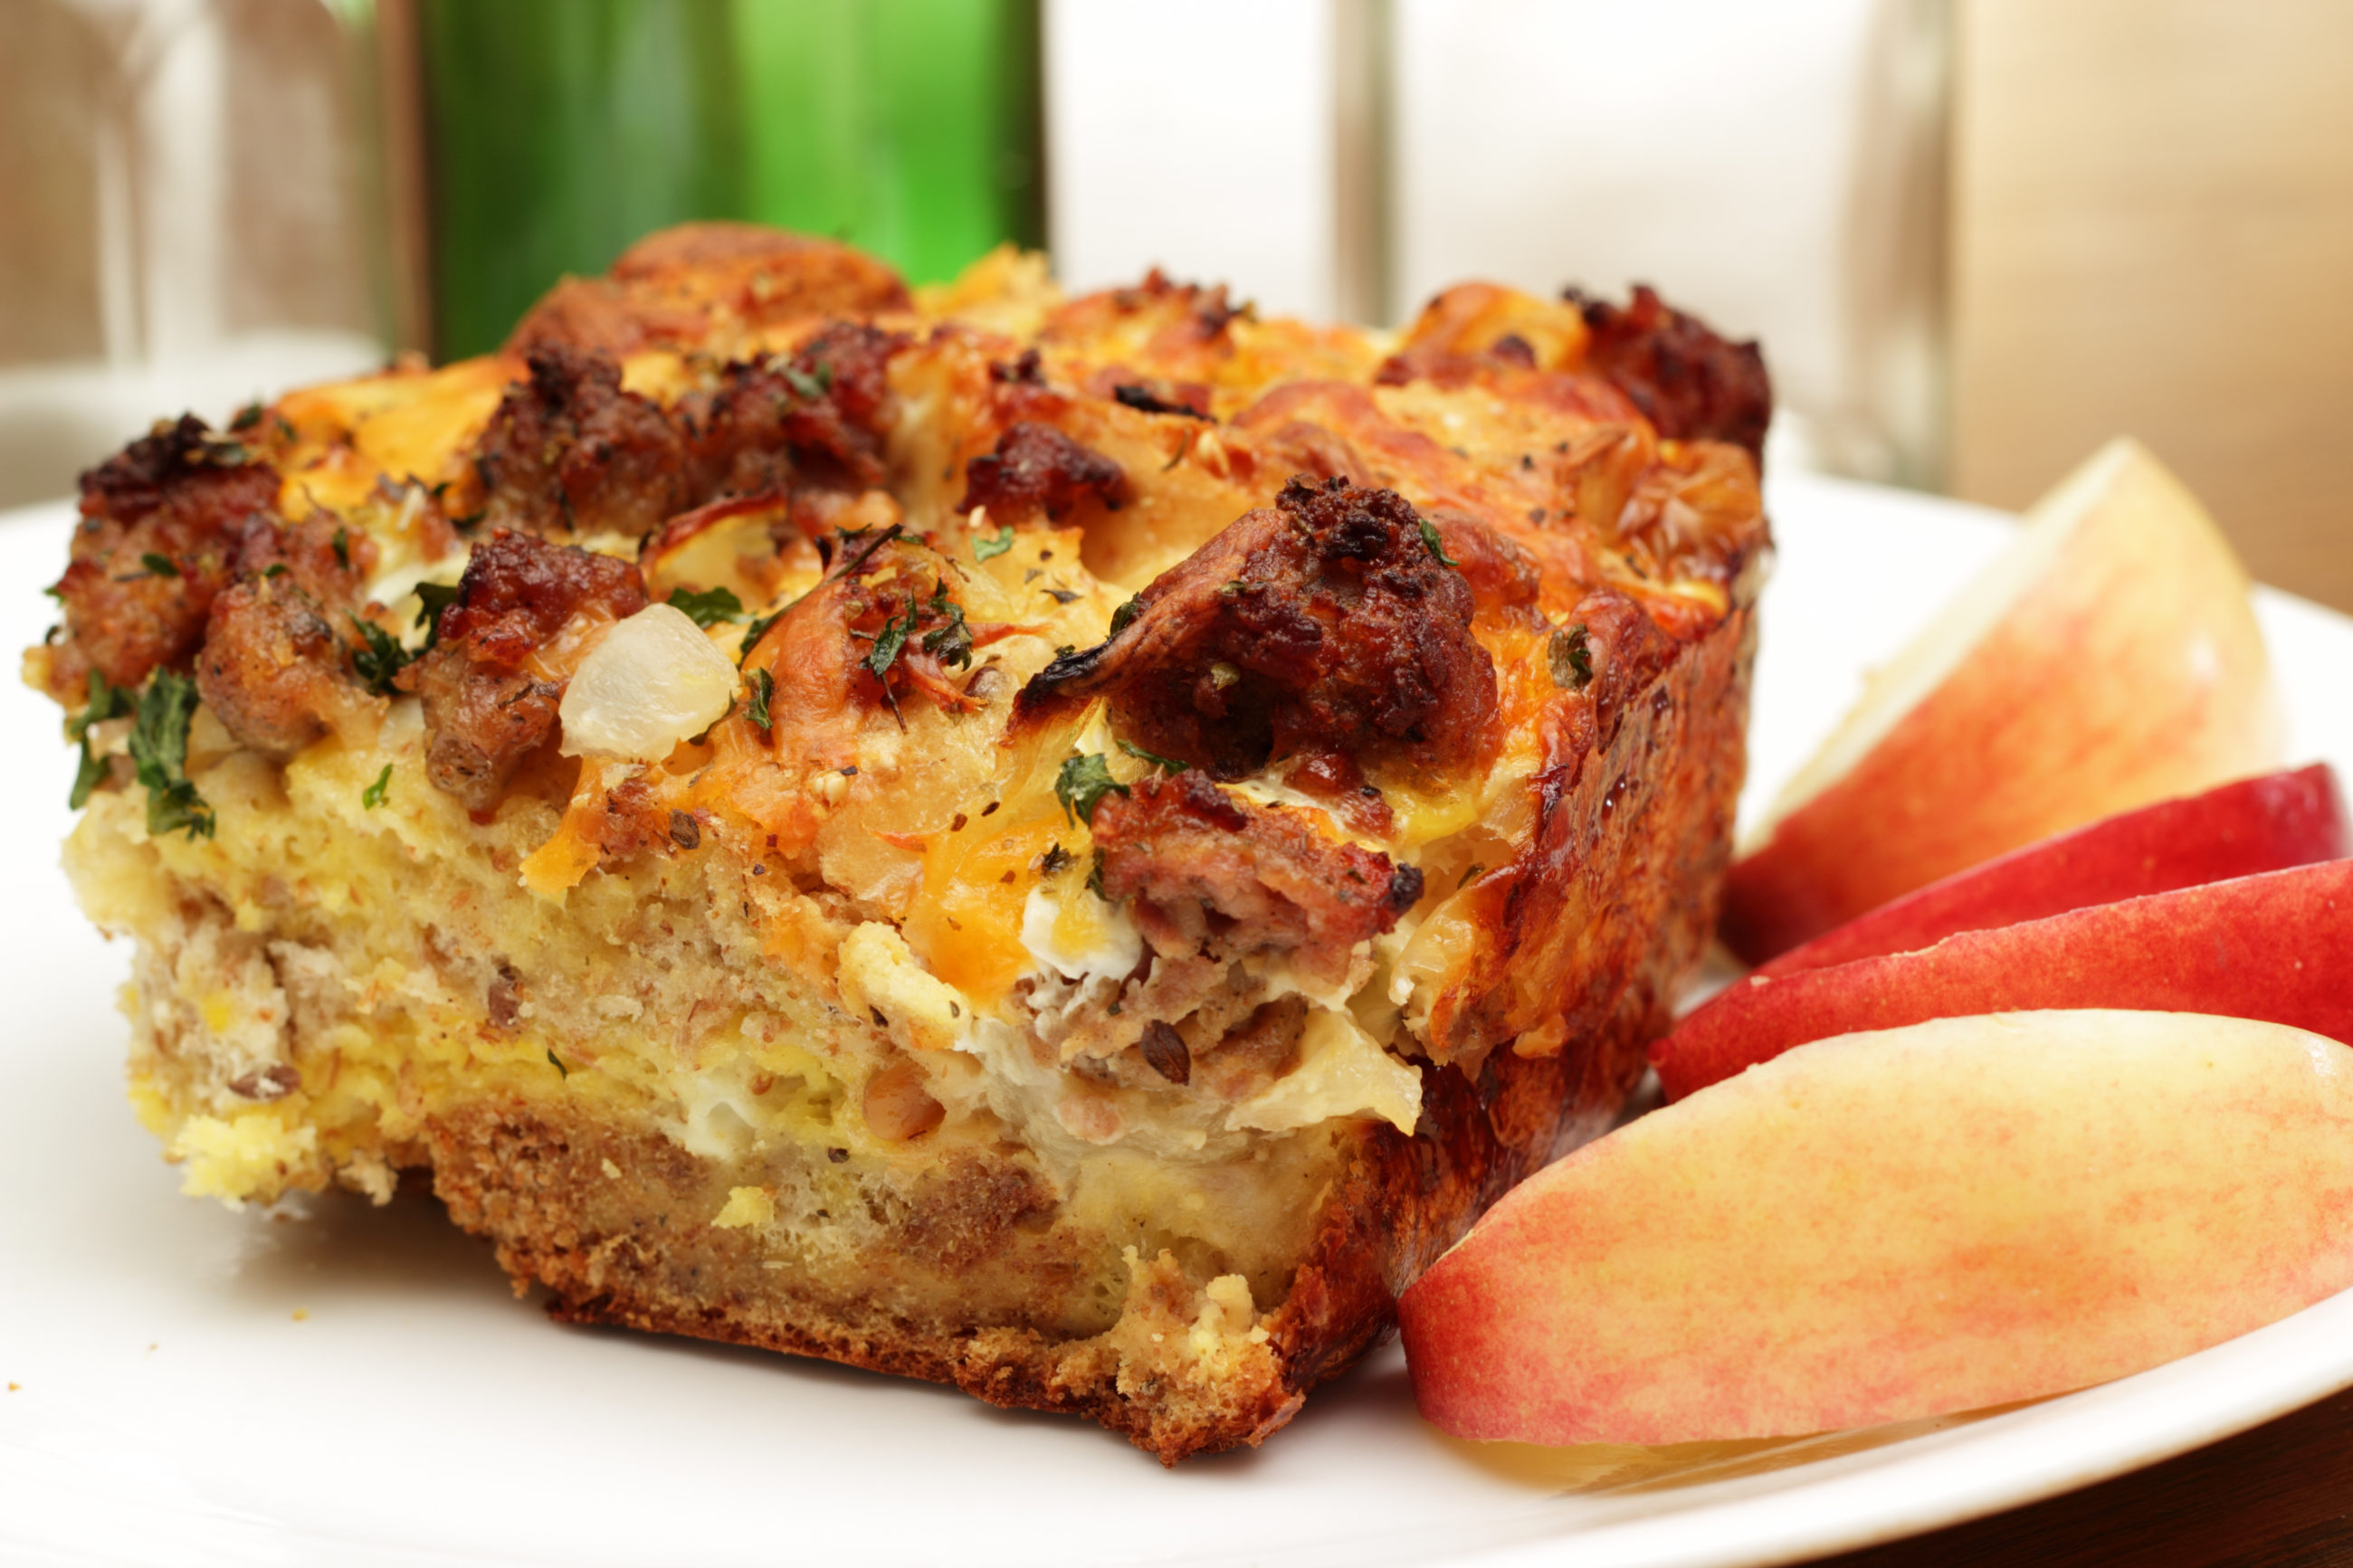 Piece of bread pudding on a white plate with a side of sliced apples.